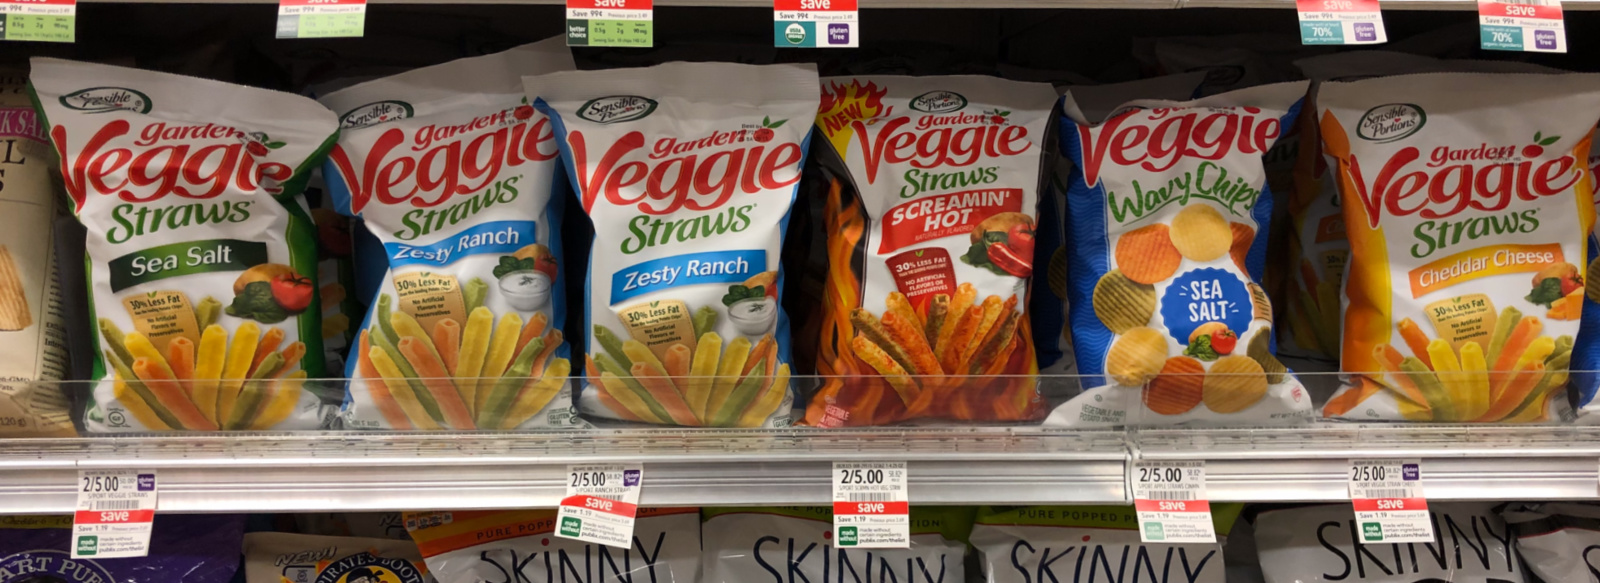 Time Stock Up For Summer Break - Sensible Portions Veggie Straws And Chips Are On Sale Now At Publix on I Heart Publix